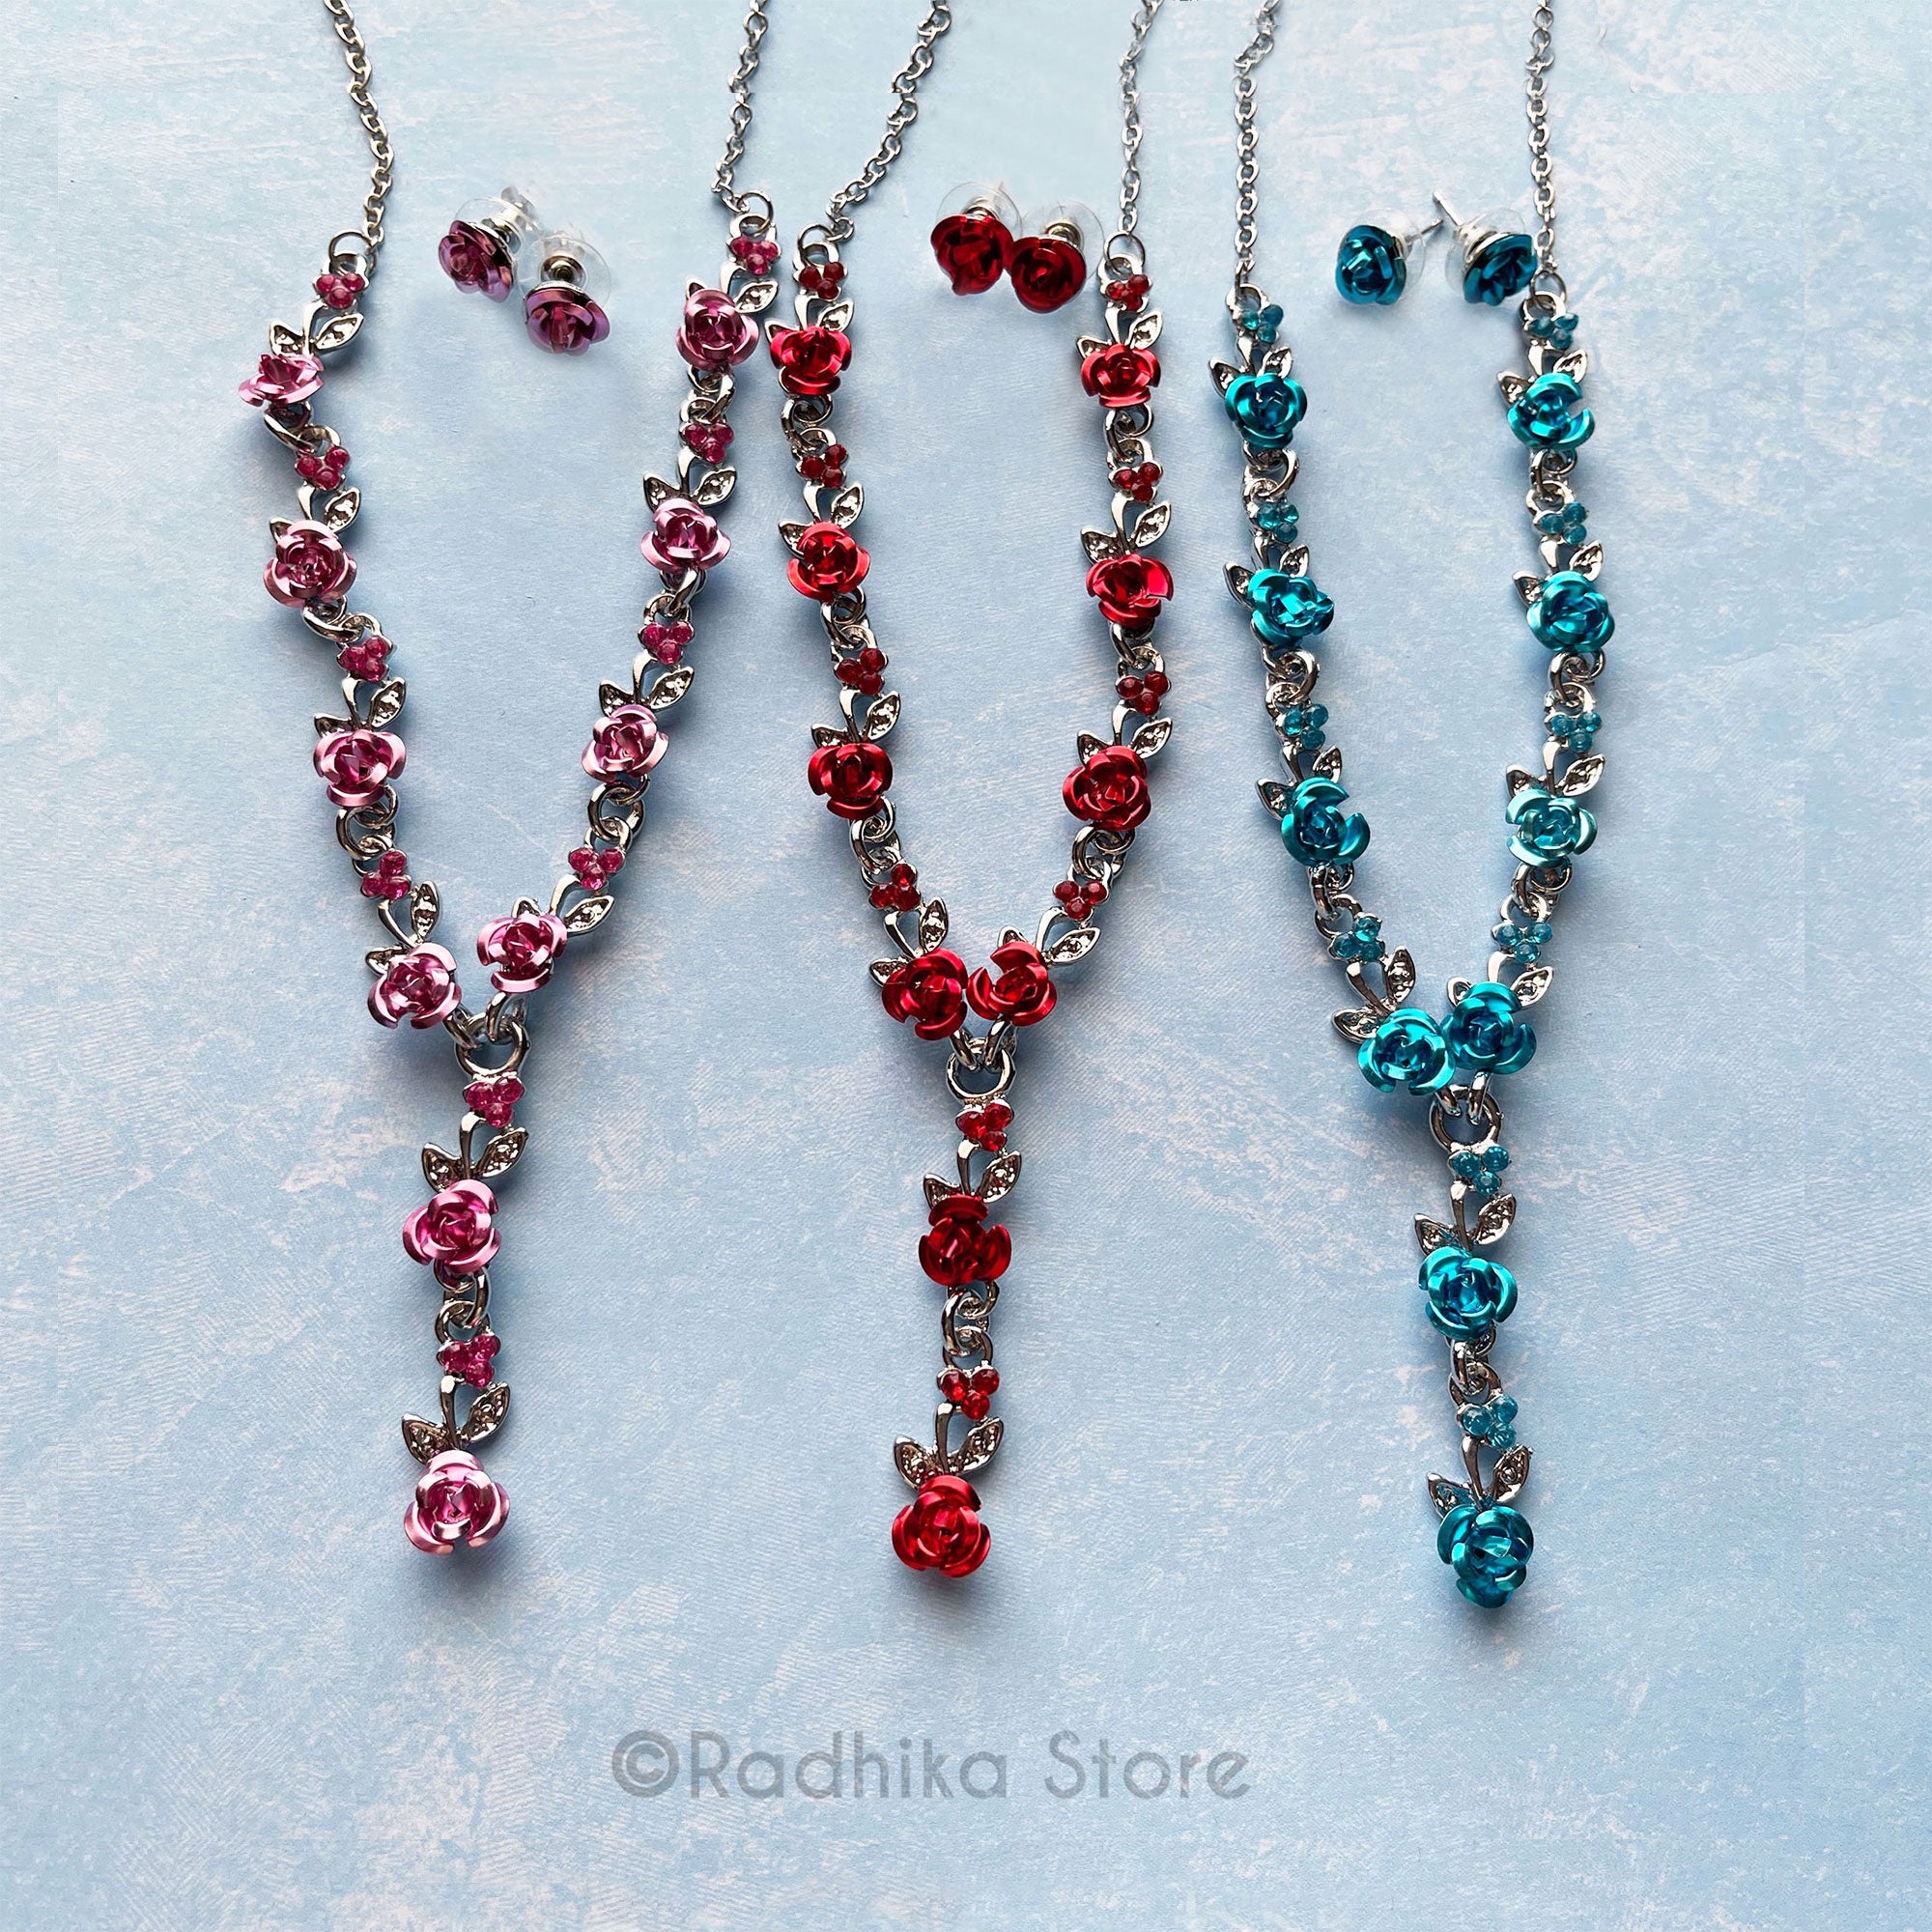 Rose With Silver Vine- 8 Inch - Pink-Red or Teal- Deity Necklaces and Earring Set